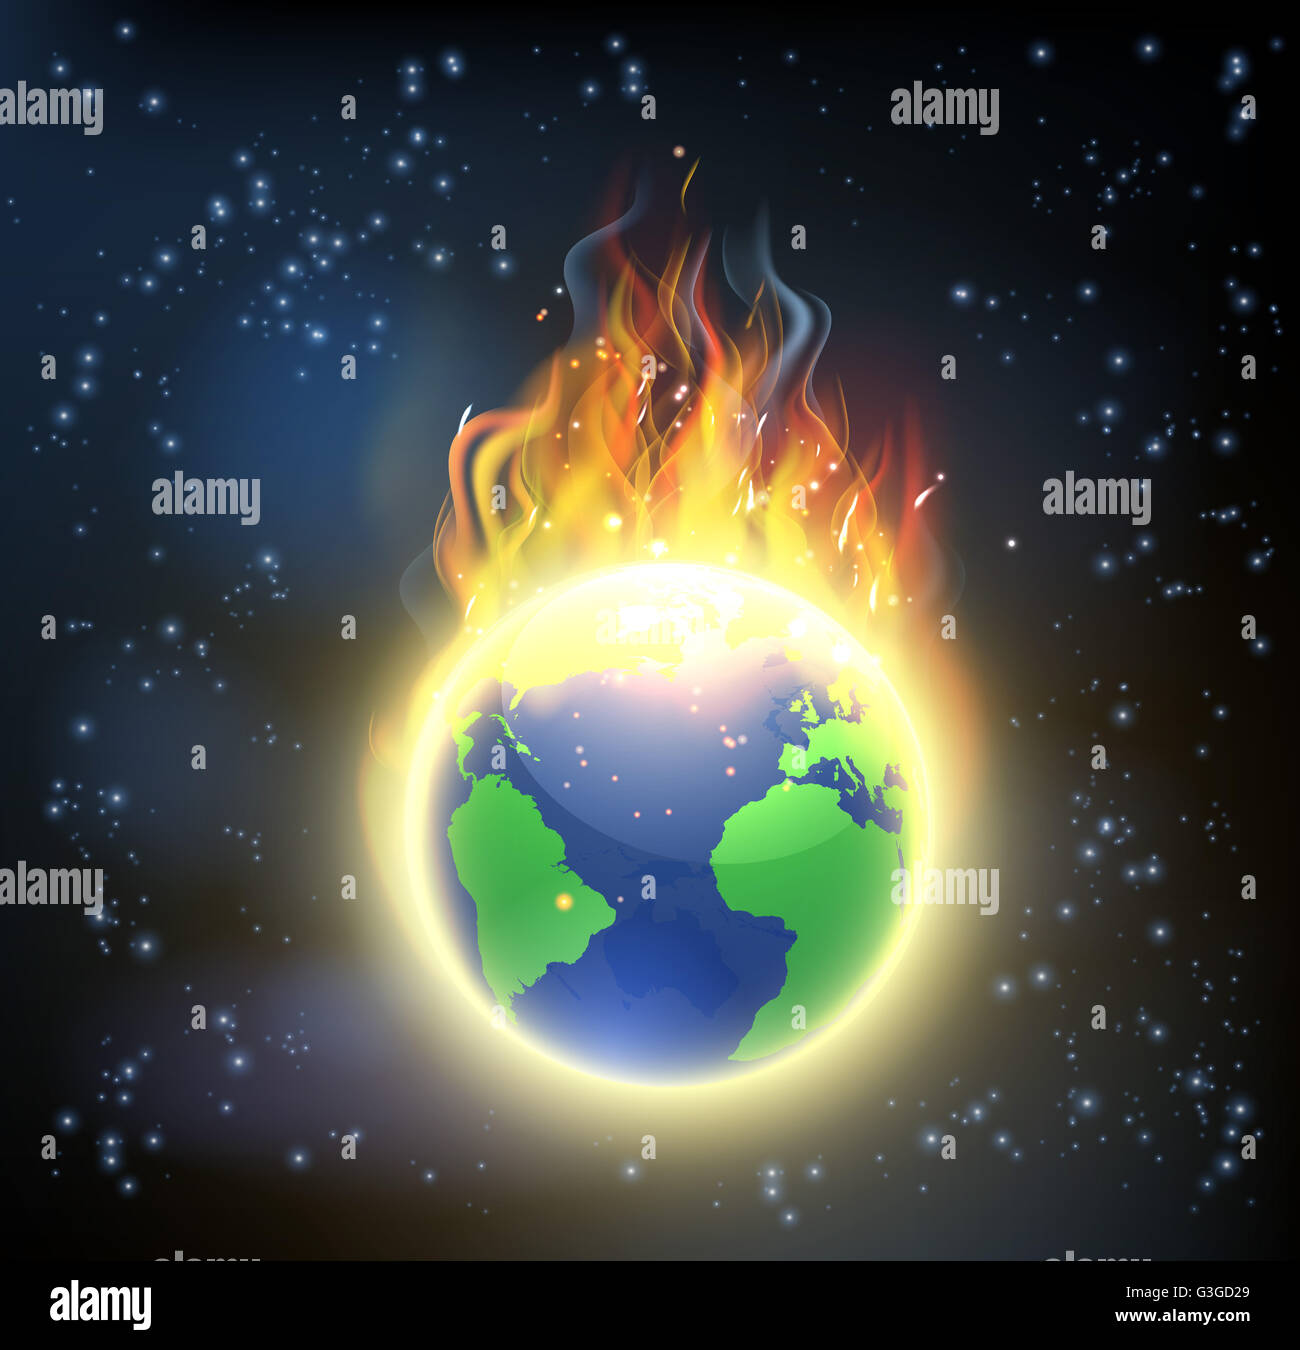 The earth world globe on fire, concept for climate change, global warming, or other disasters Stock Photo